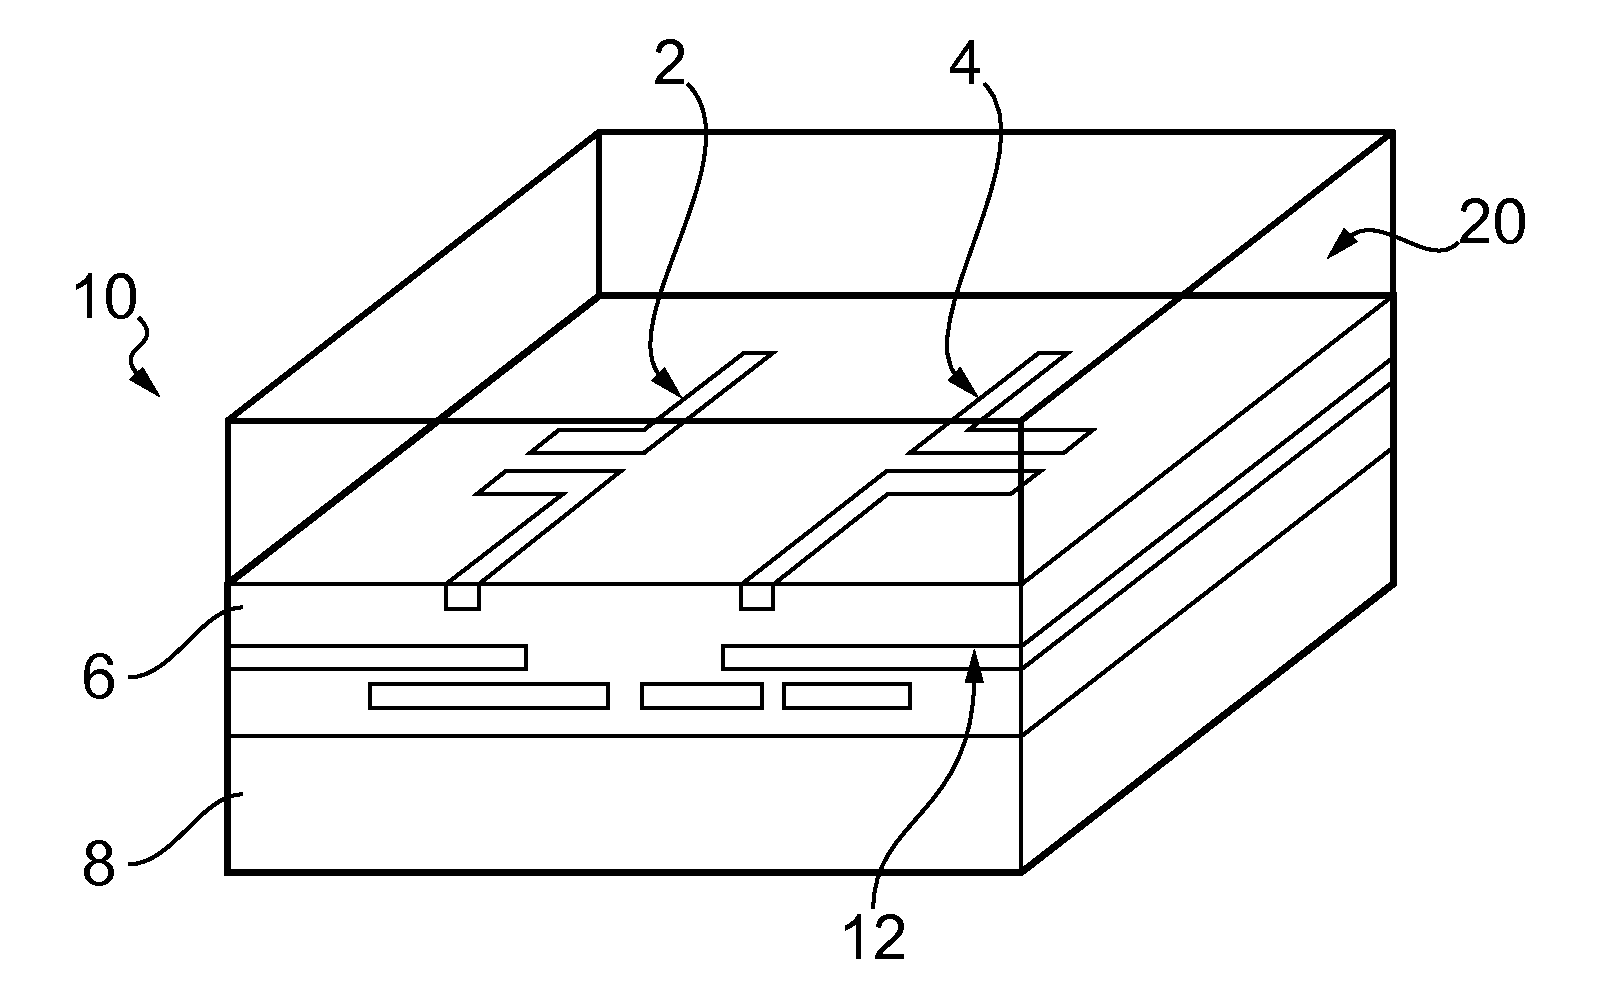 Wireless interconnect for an integrated circuit